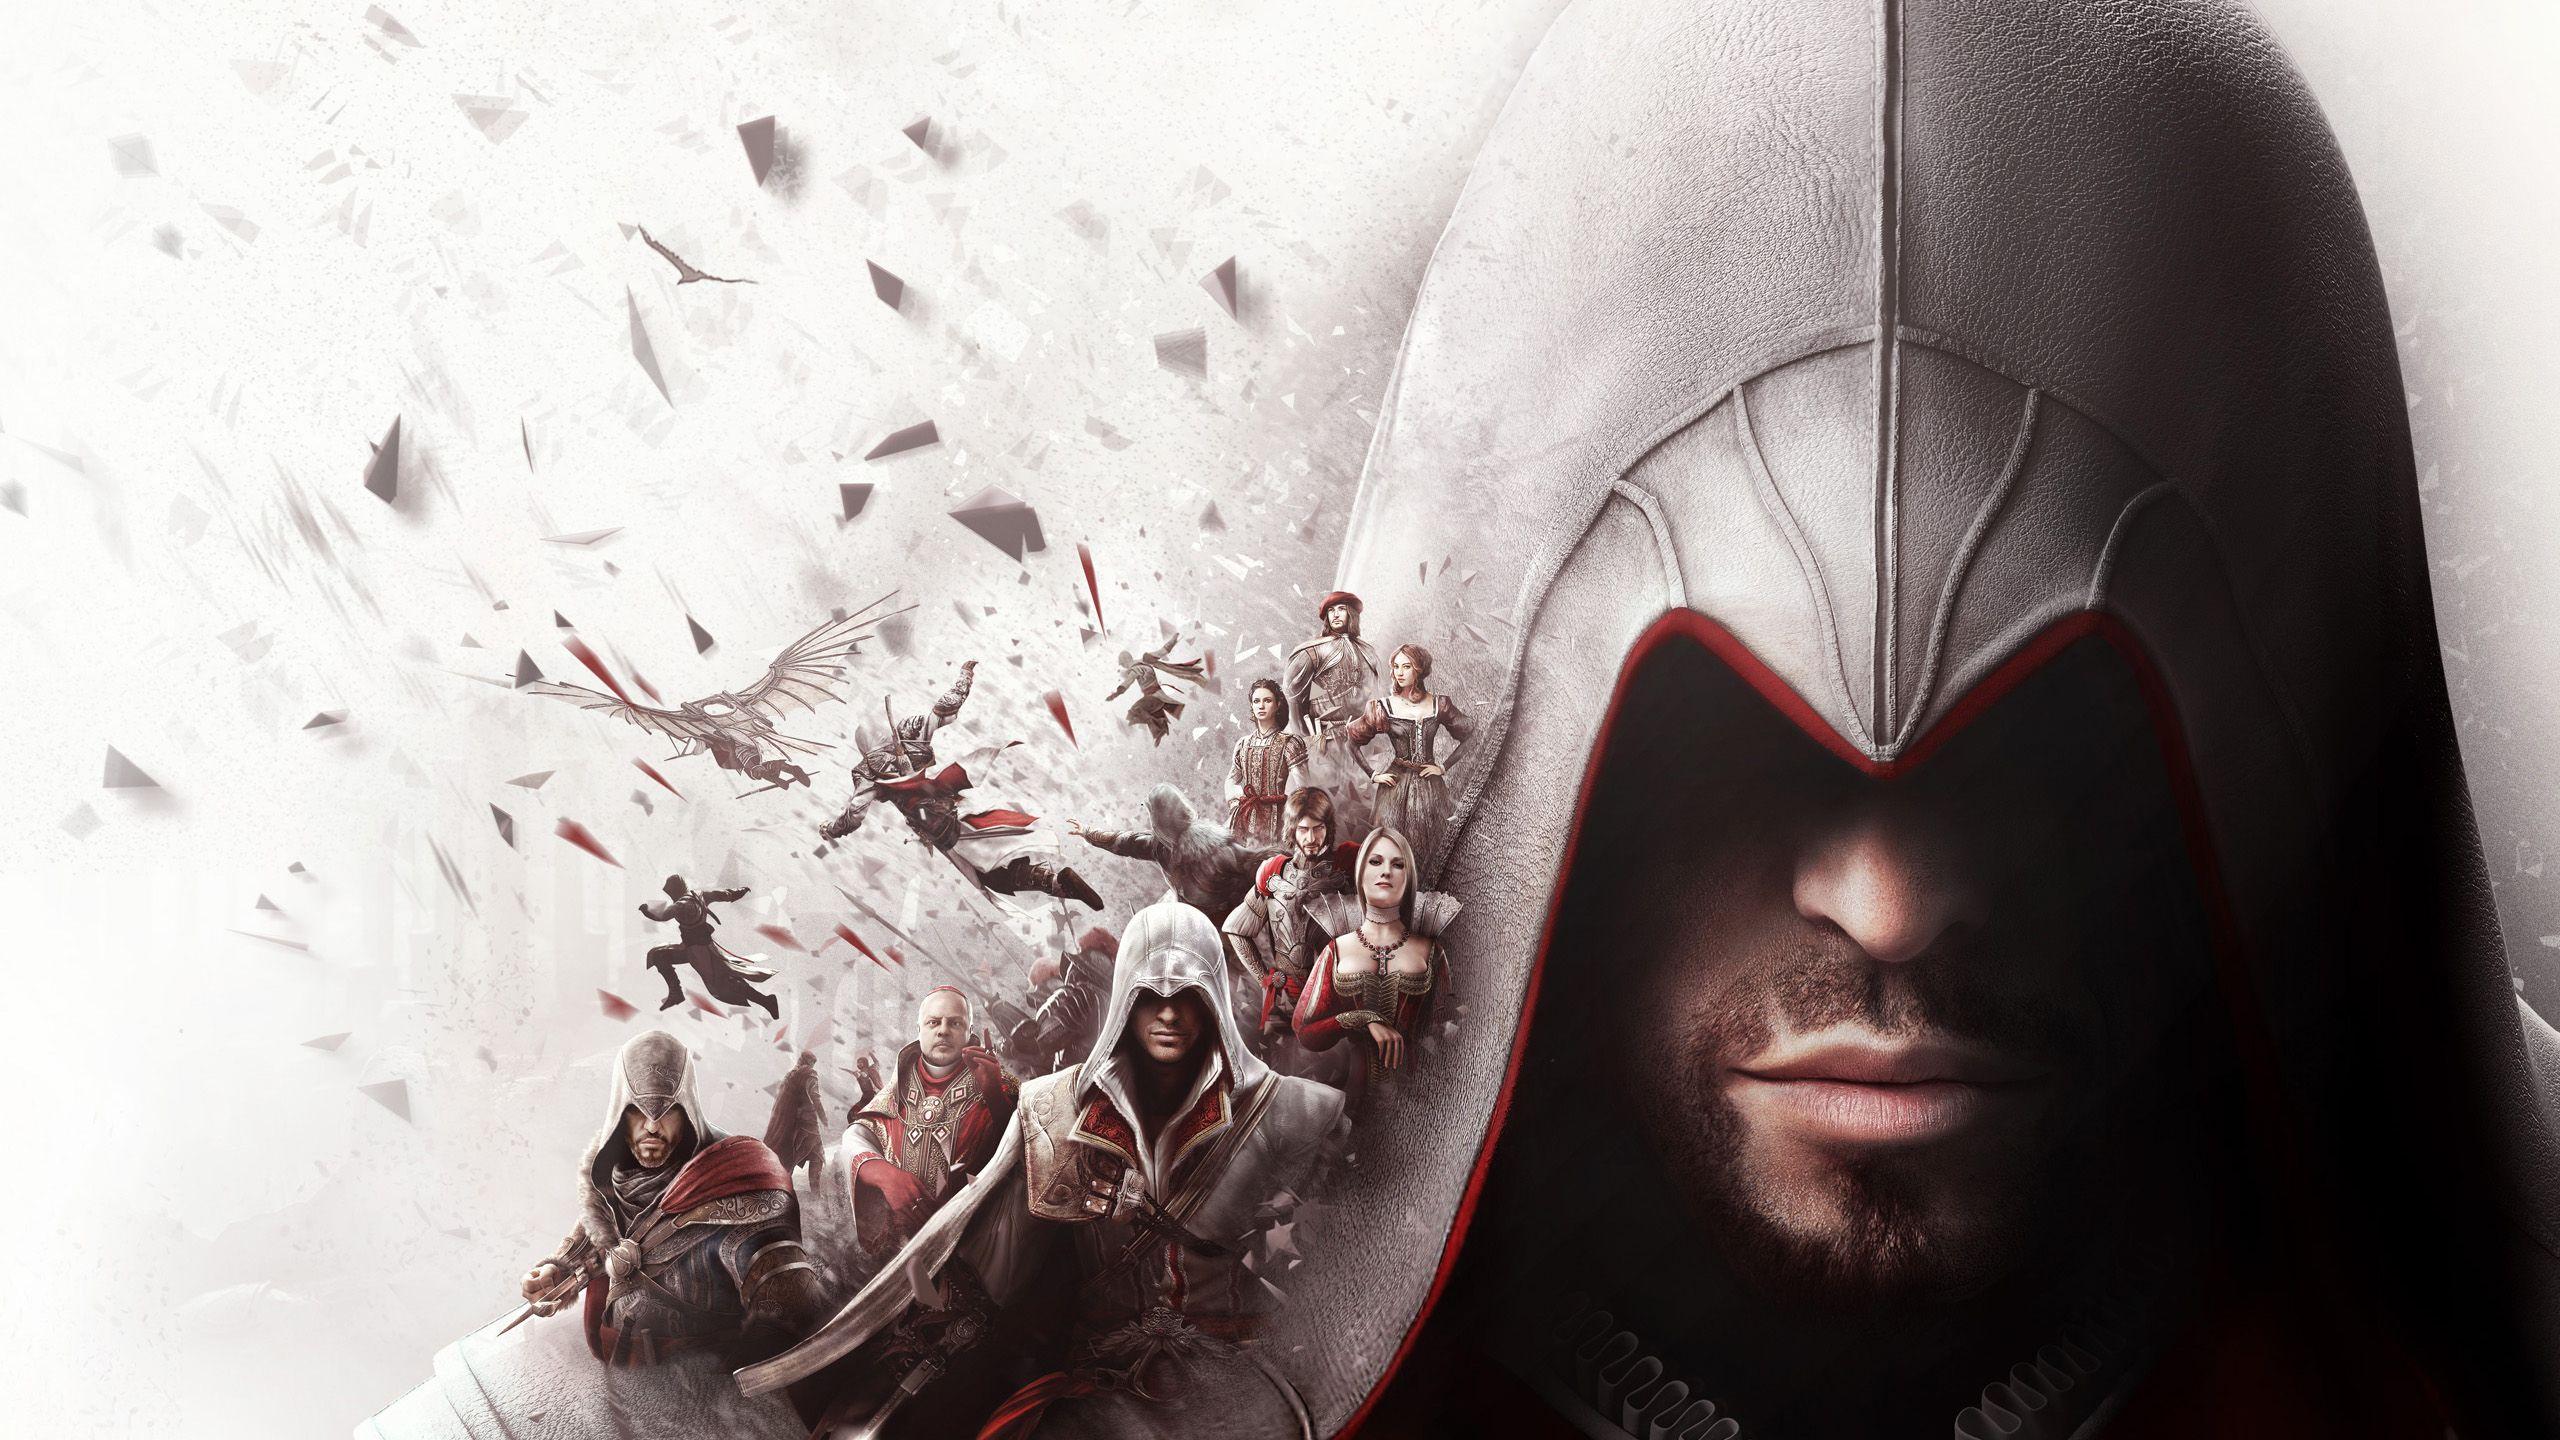 Assassin's Creed Wallpapers - Top Free Assassin's Creed Backgrounds -  WallpaperAccess